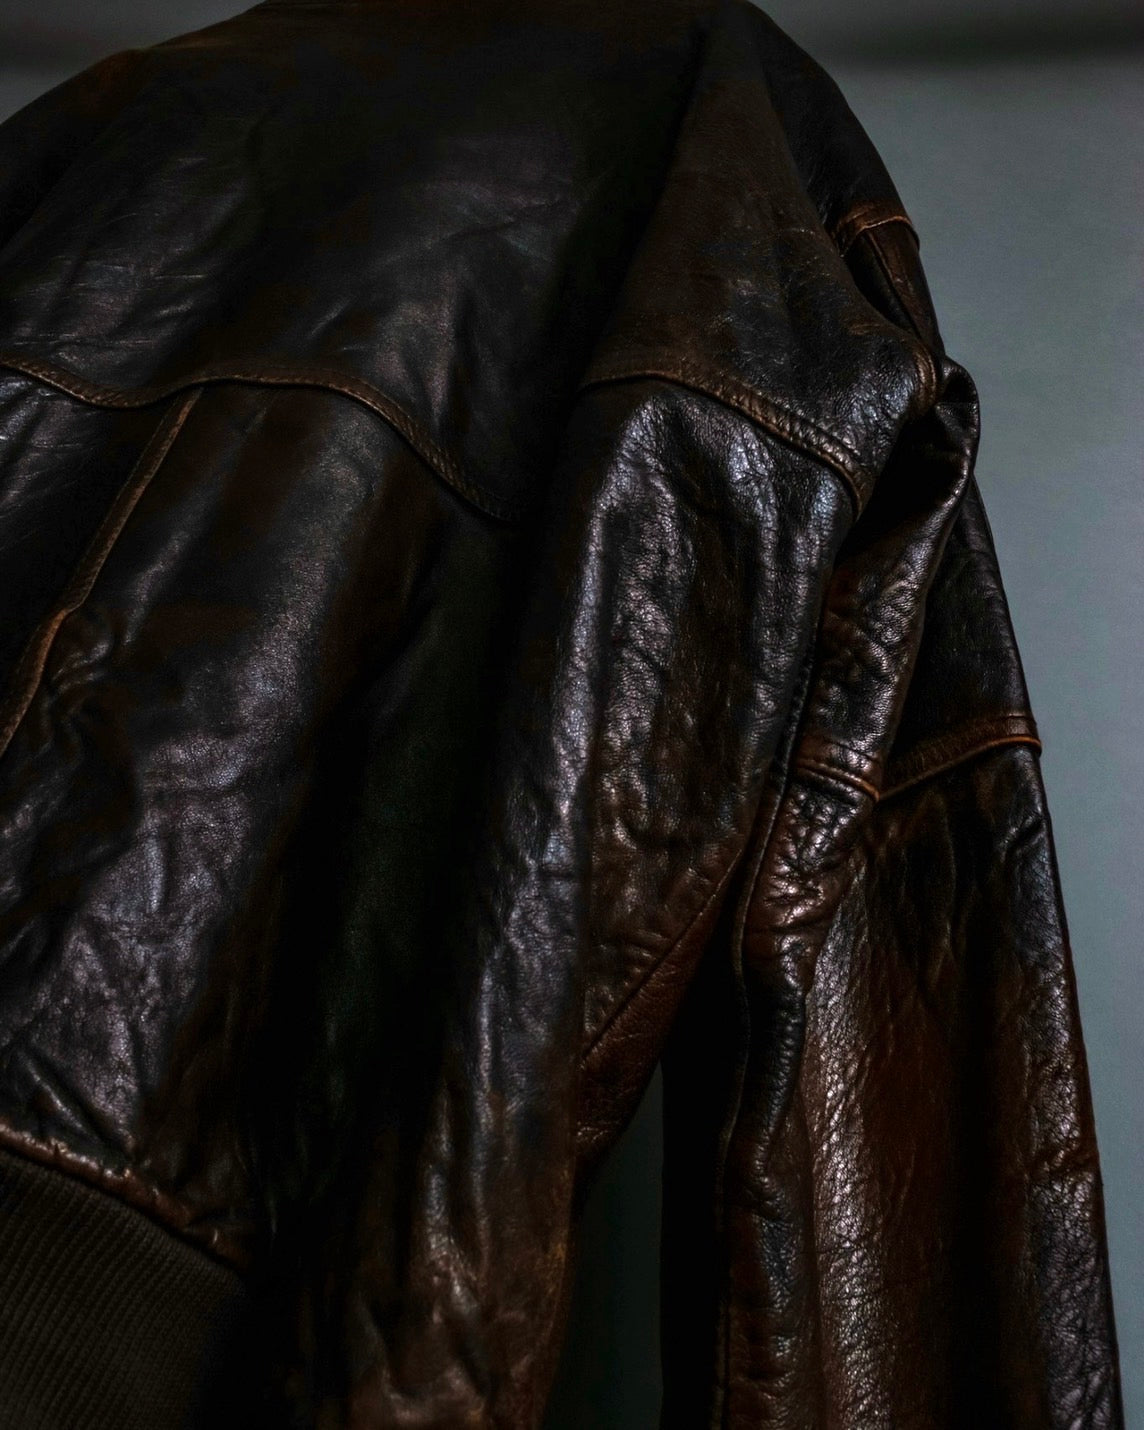 "MOOD SPECIAL" Super Aging Leather Blouson